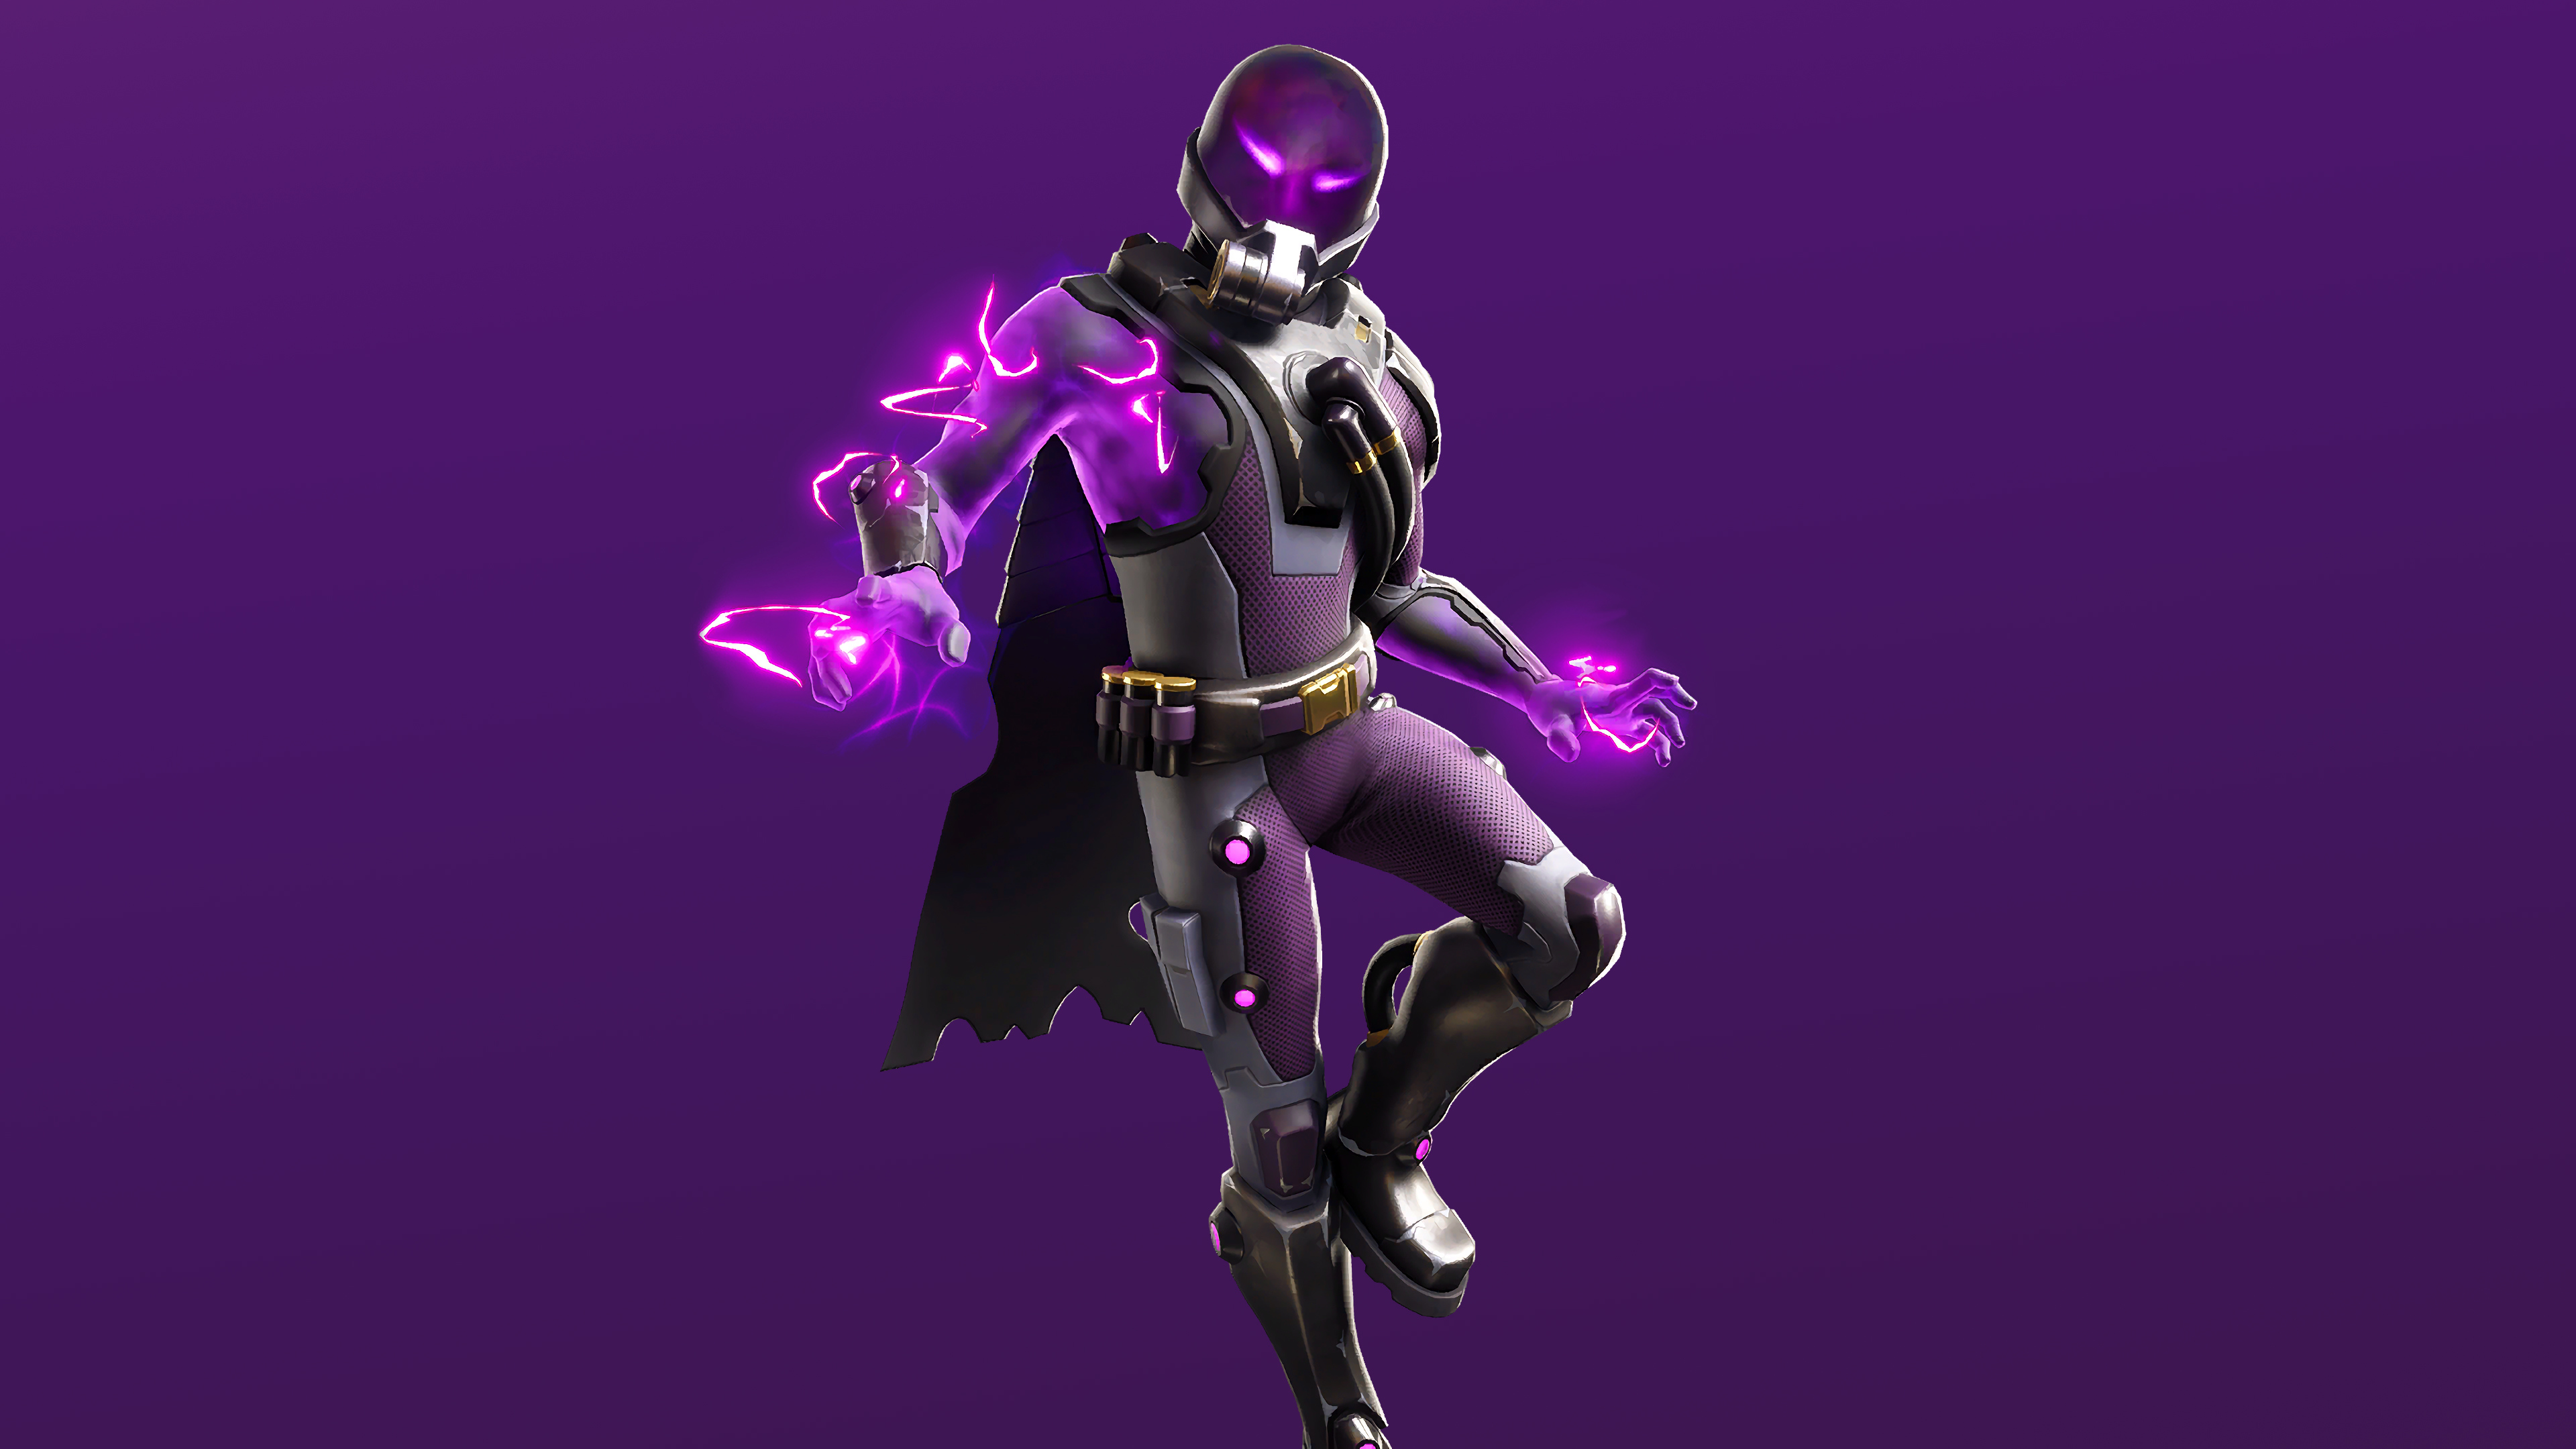 Wallpaper Fortnite Tempest Skin Outfit